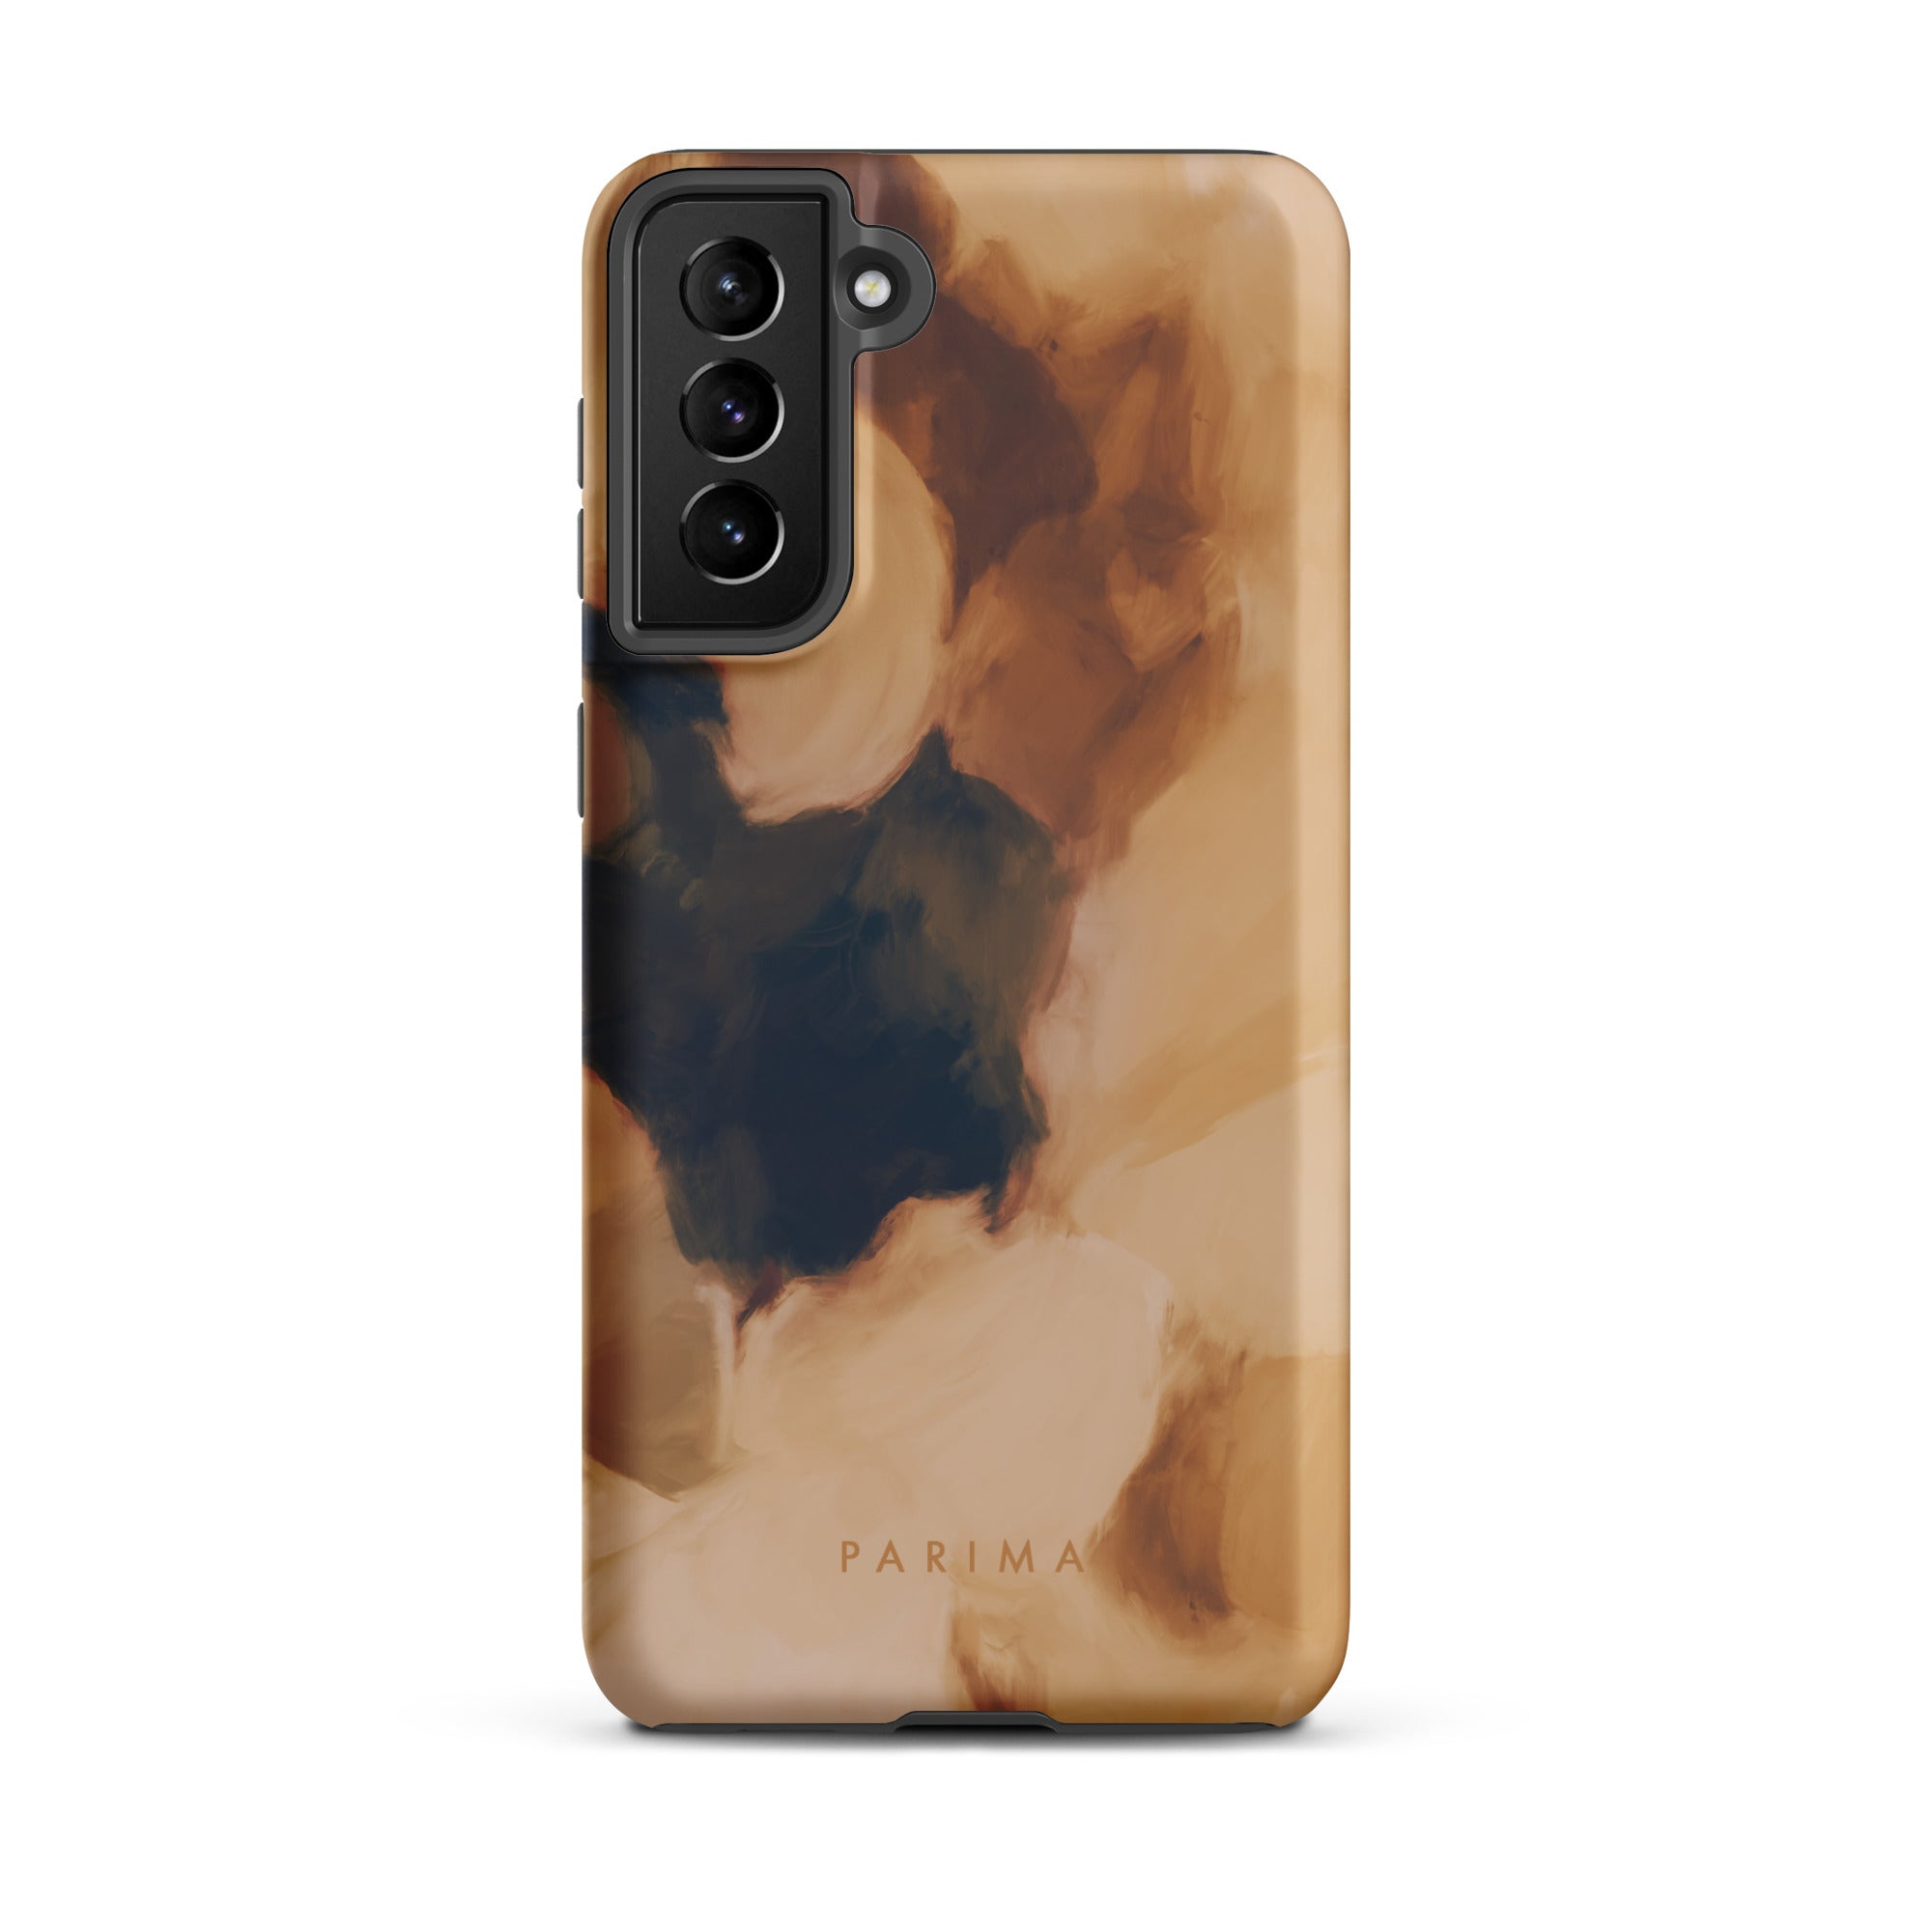 Clay, brown and tan color abstract art on Samsung Galaxy s21 Plus tough case by Parima Studio